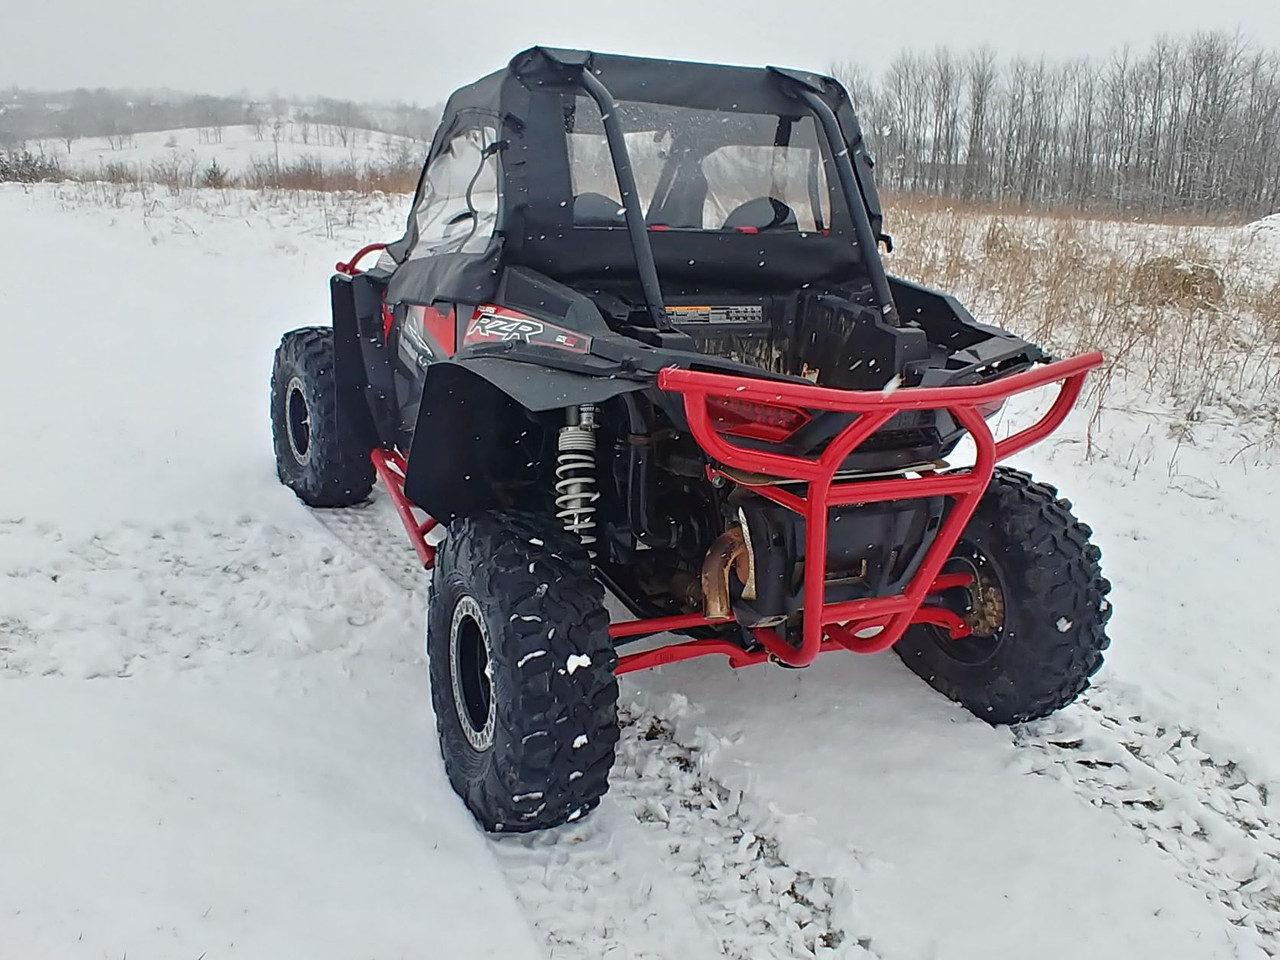 3 Star side x side accessories Polaris RZR XP1000/XP Turbo/S1000 upper doors and rear window rear angle view